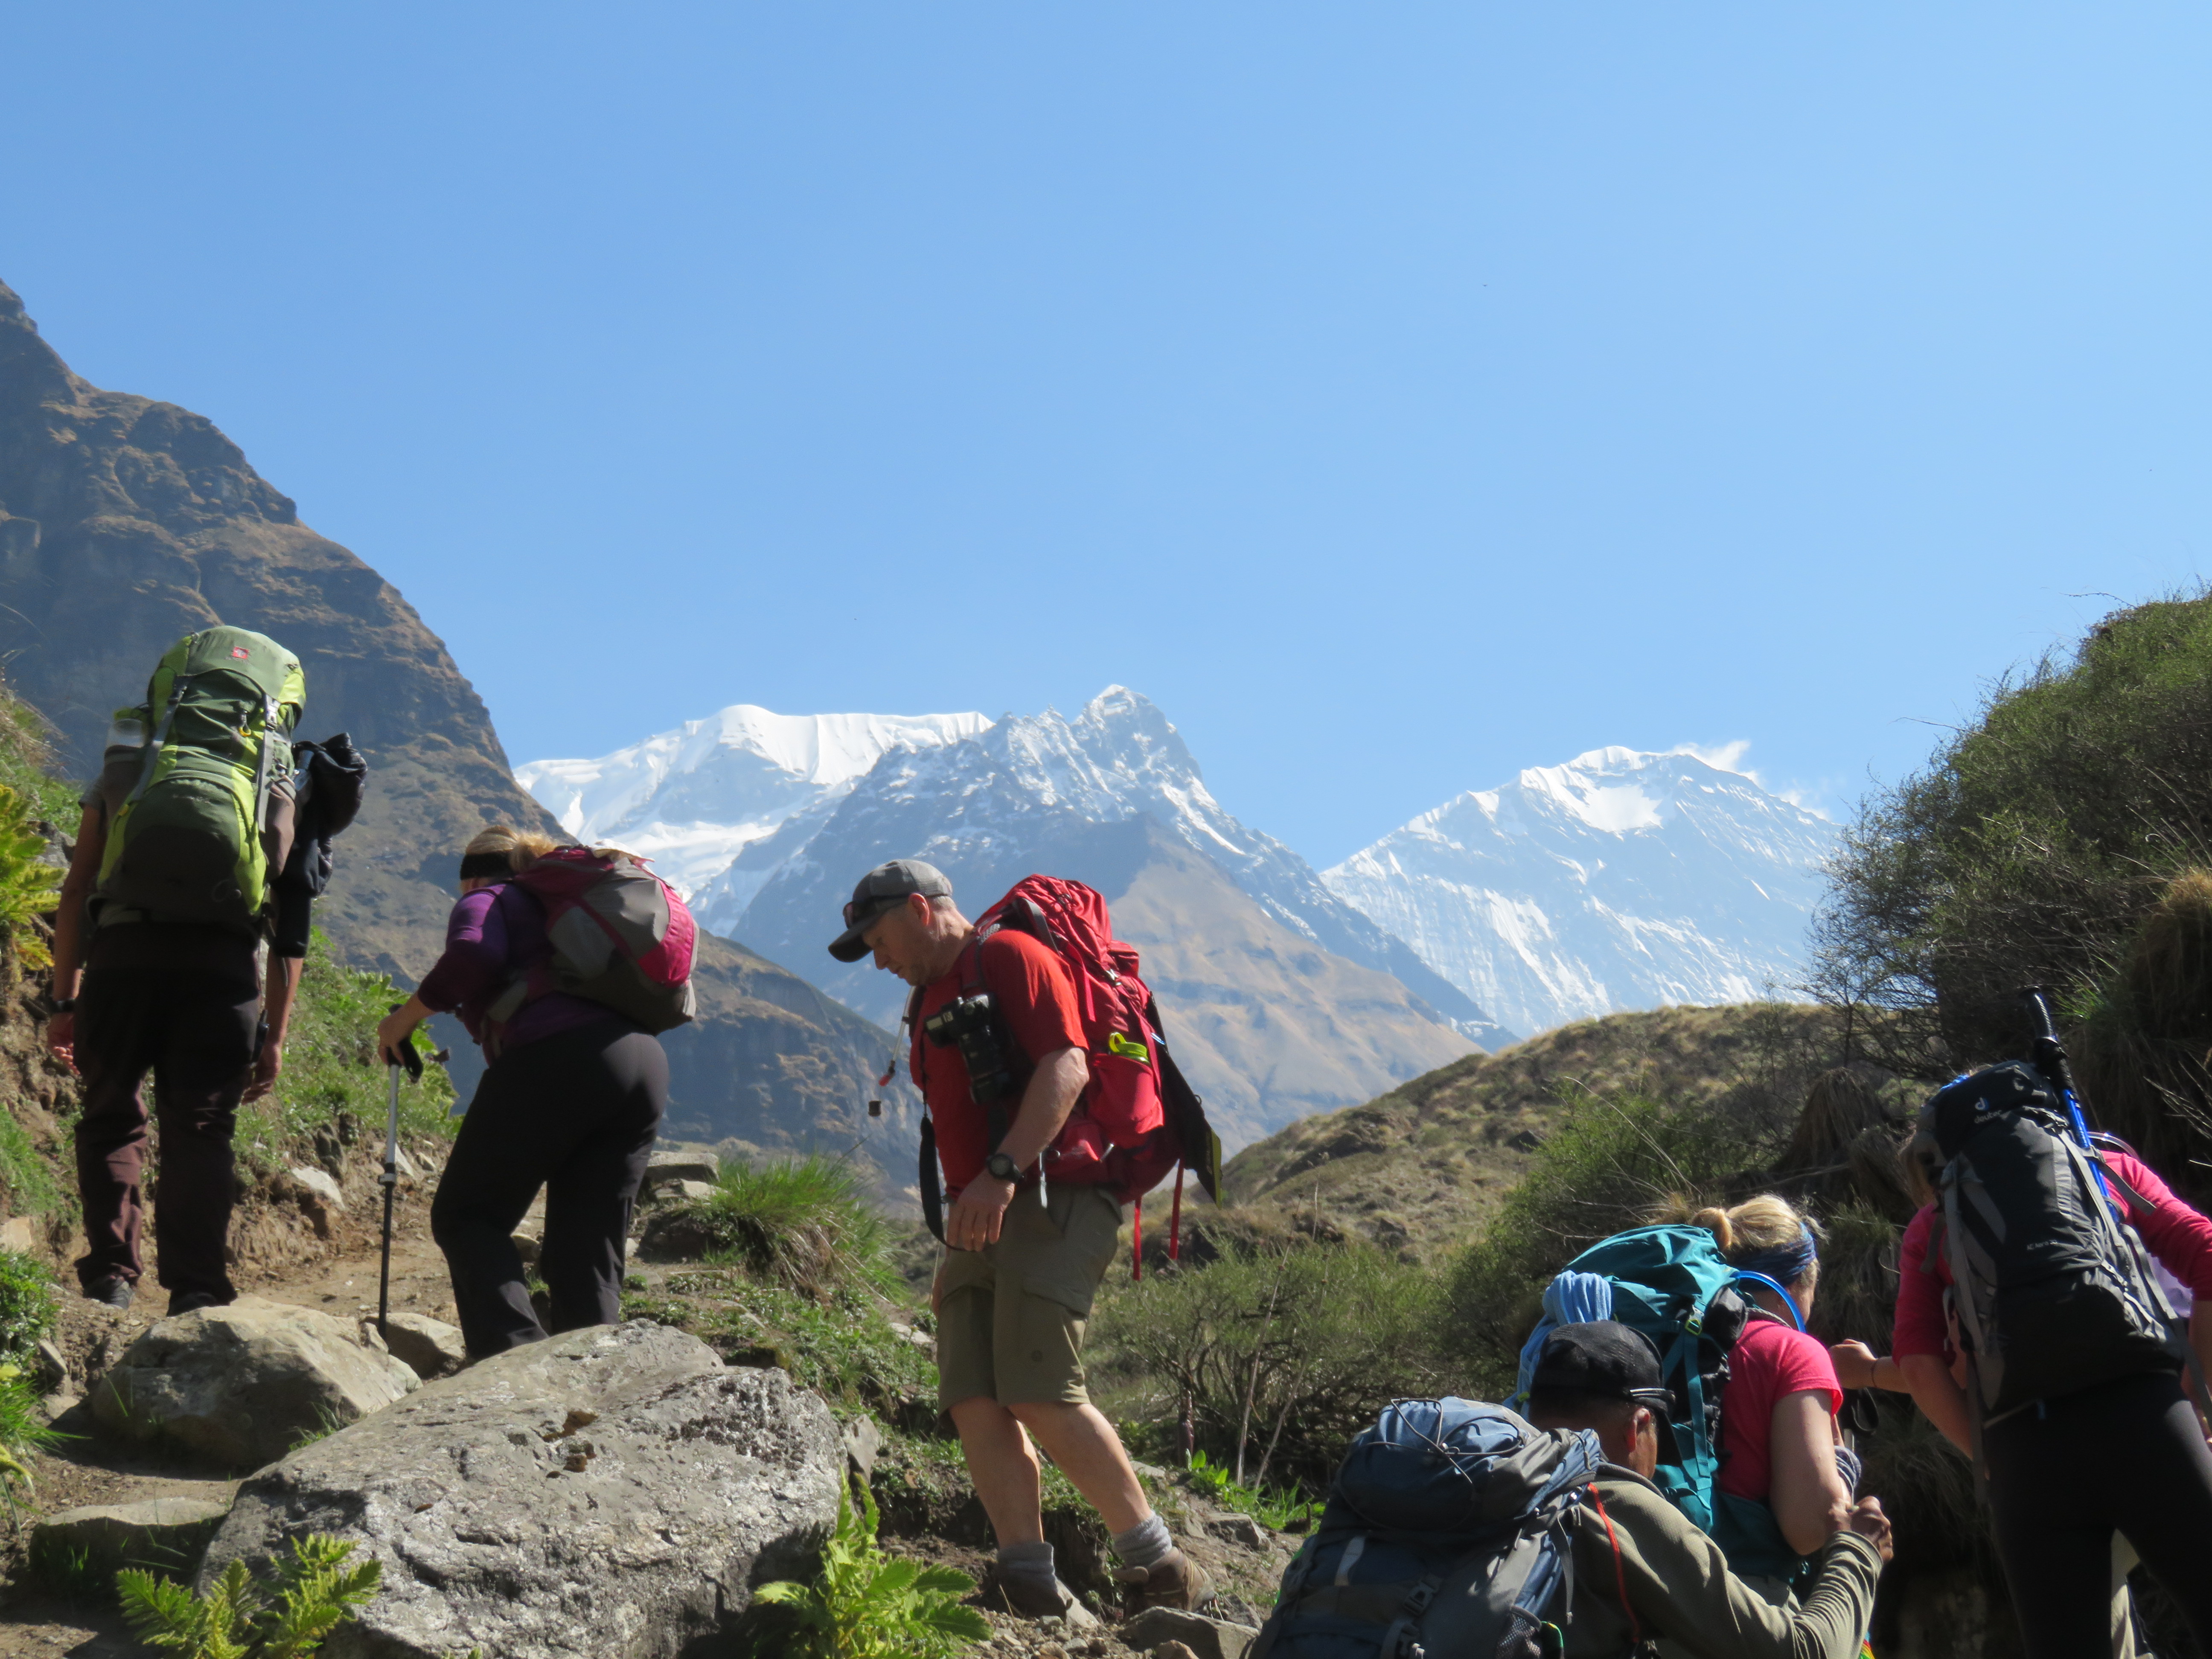 Packing for your Annapurna Base Camp Trek